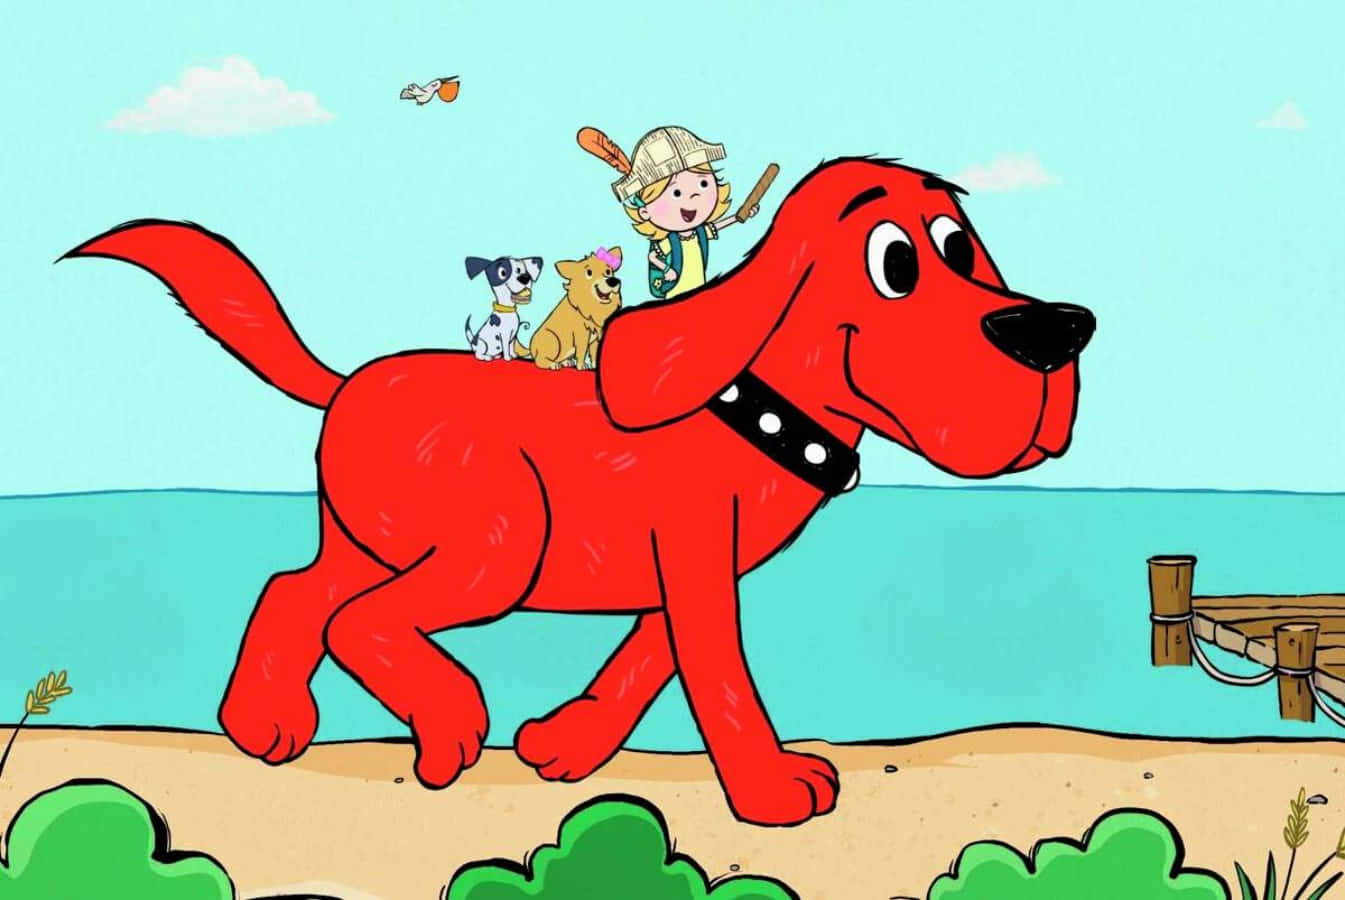 Clifford The Big Red Dog is ready to play